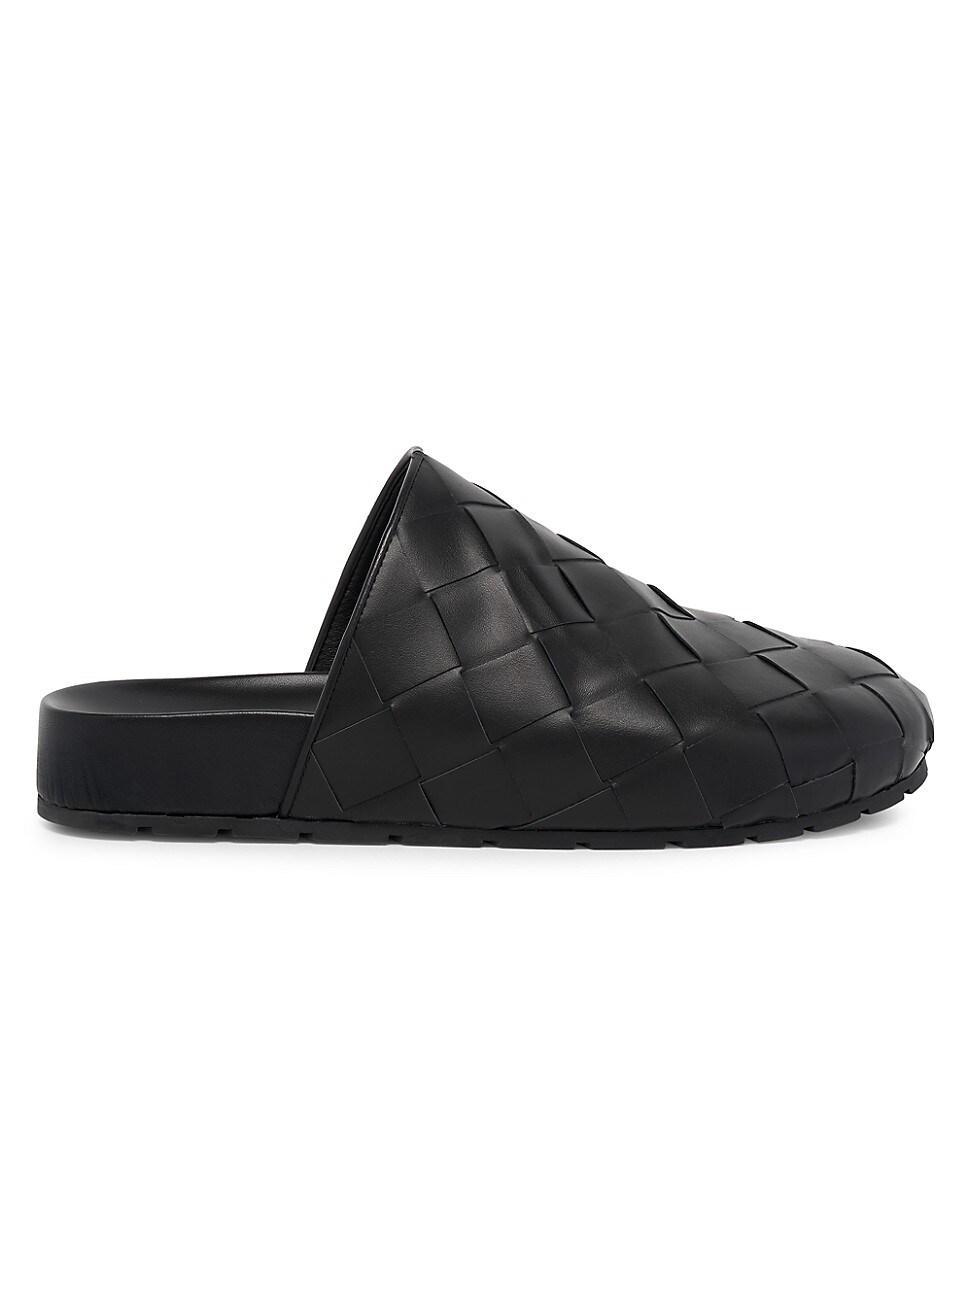 Mens Reggie Woven Leather Mule Clogs Product Image